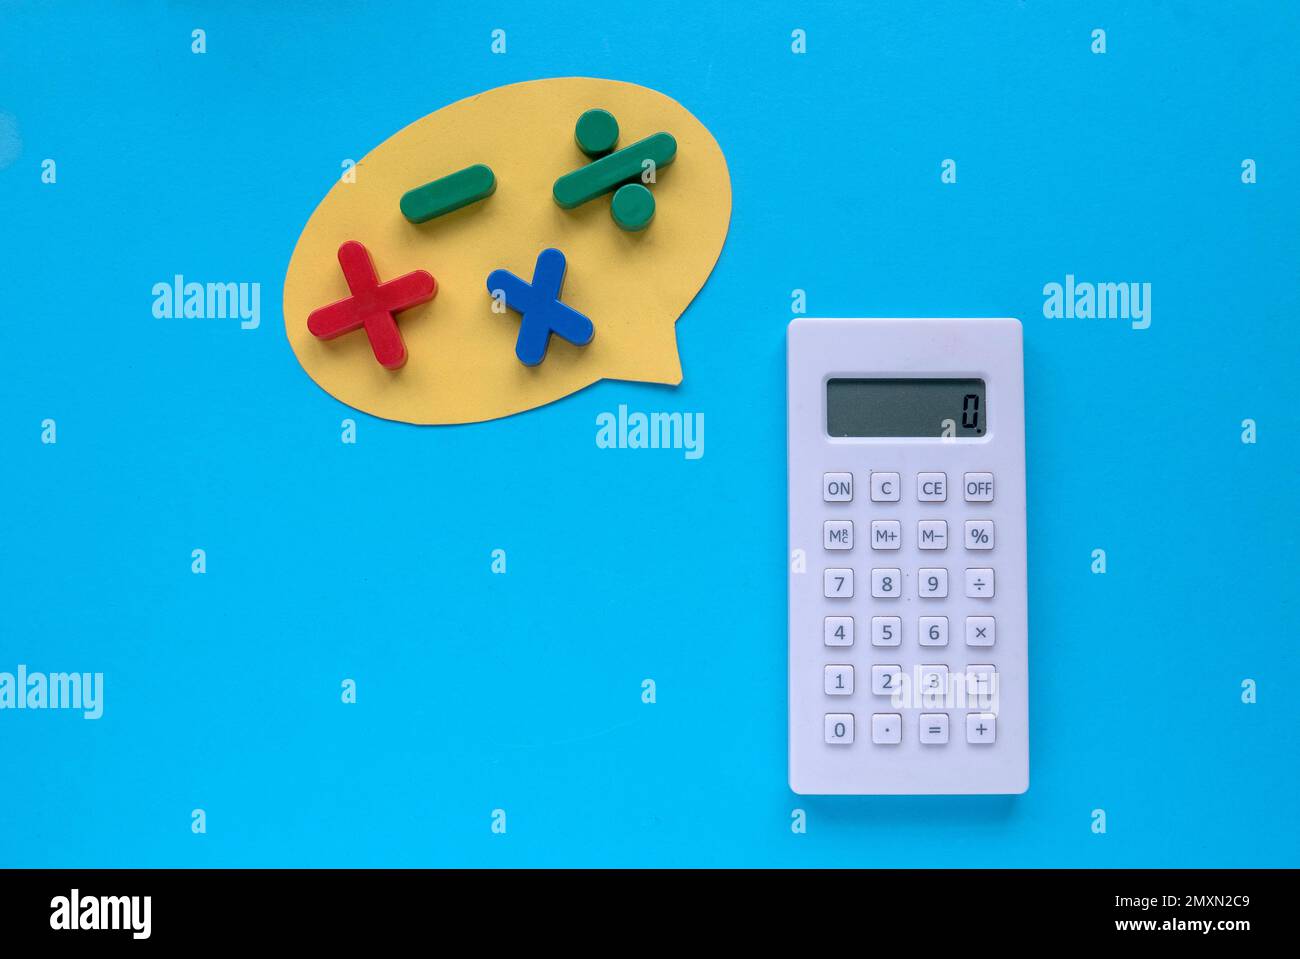 Colorful mathematical shape (Plus, minus, multiply, divide) and calculator on a blue background. Stock Photo